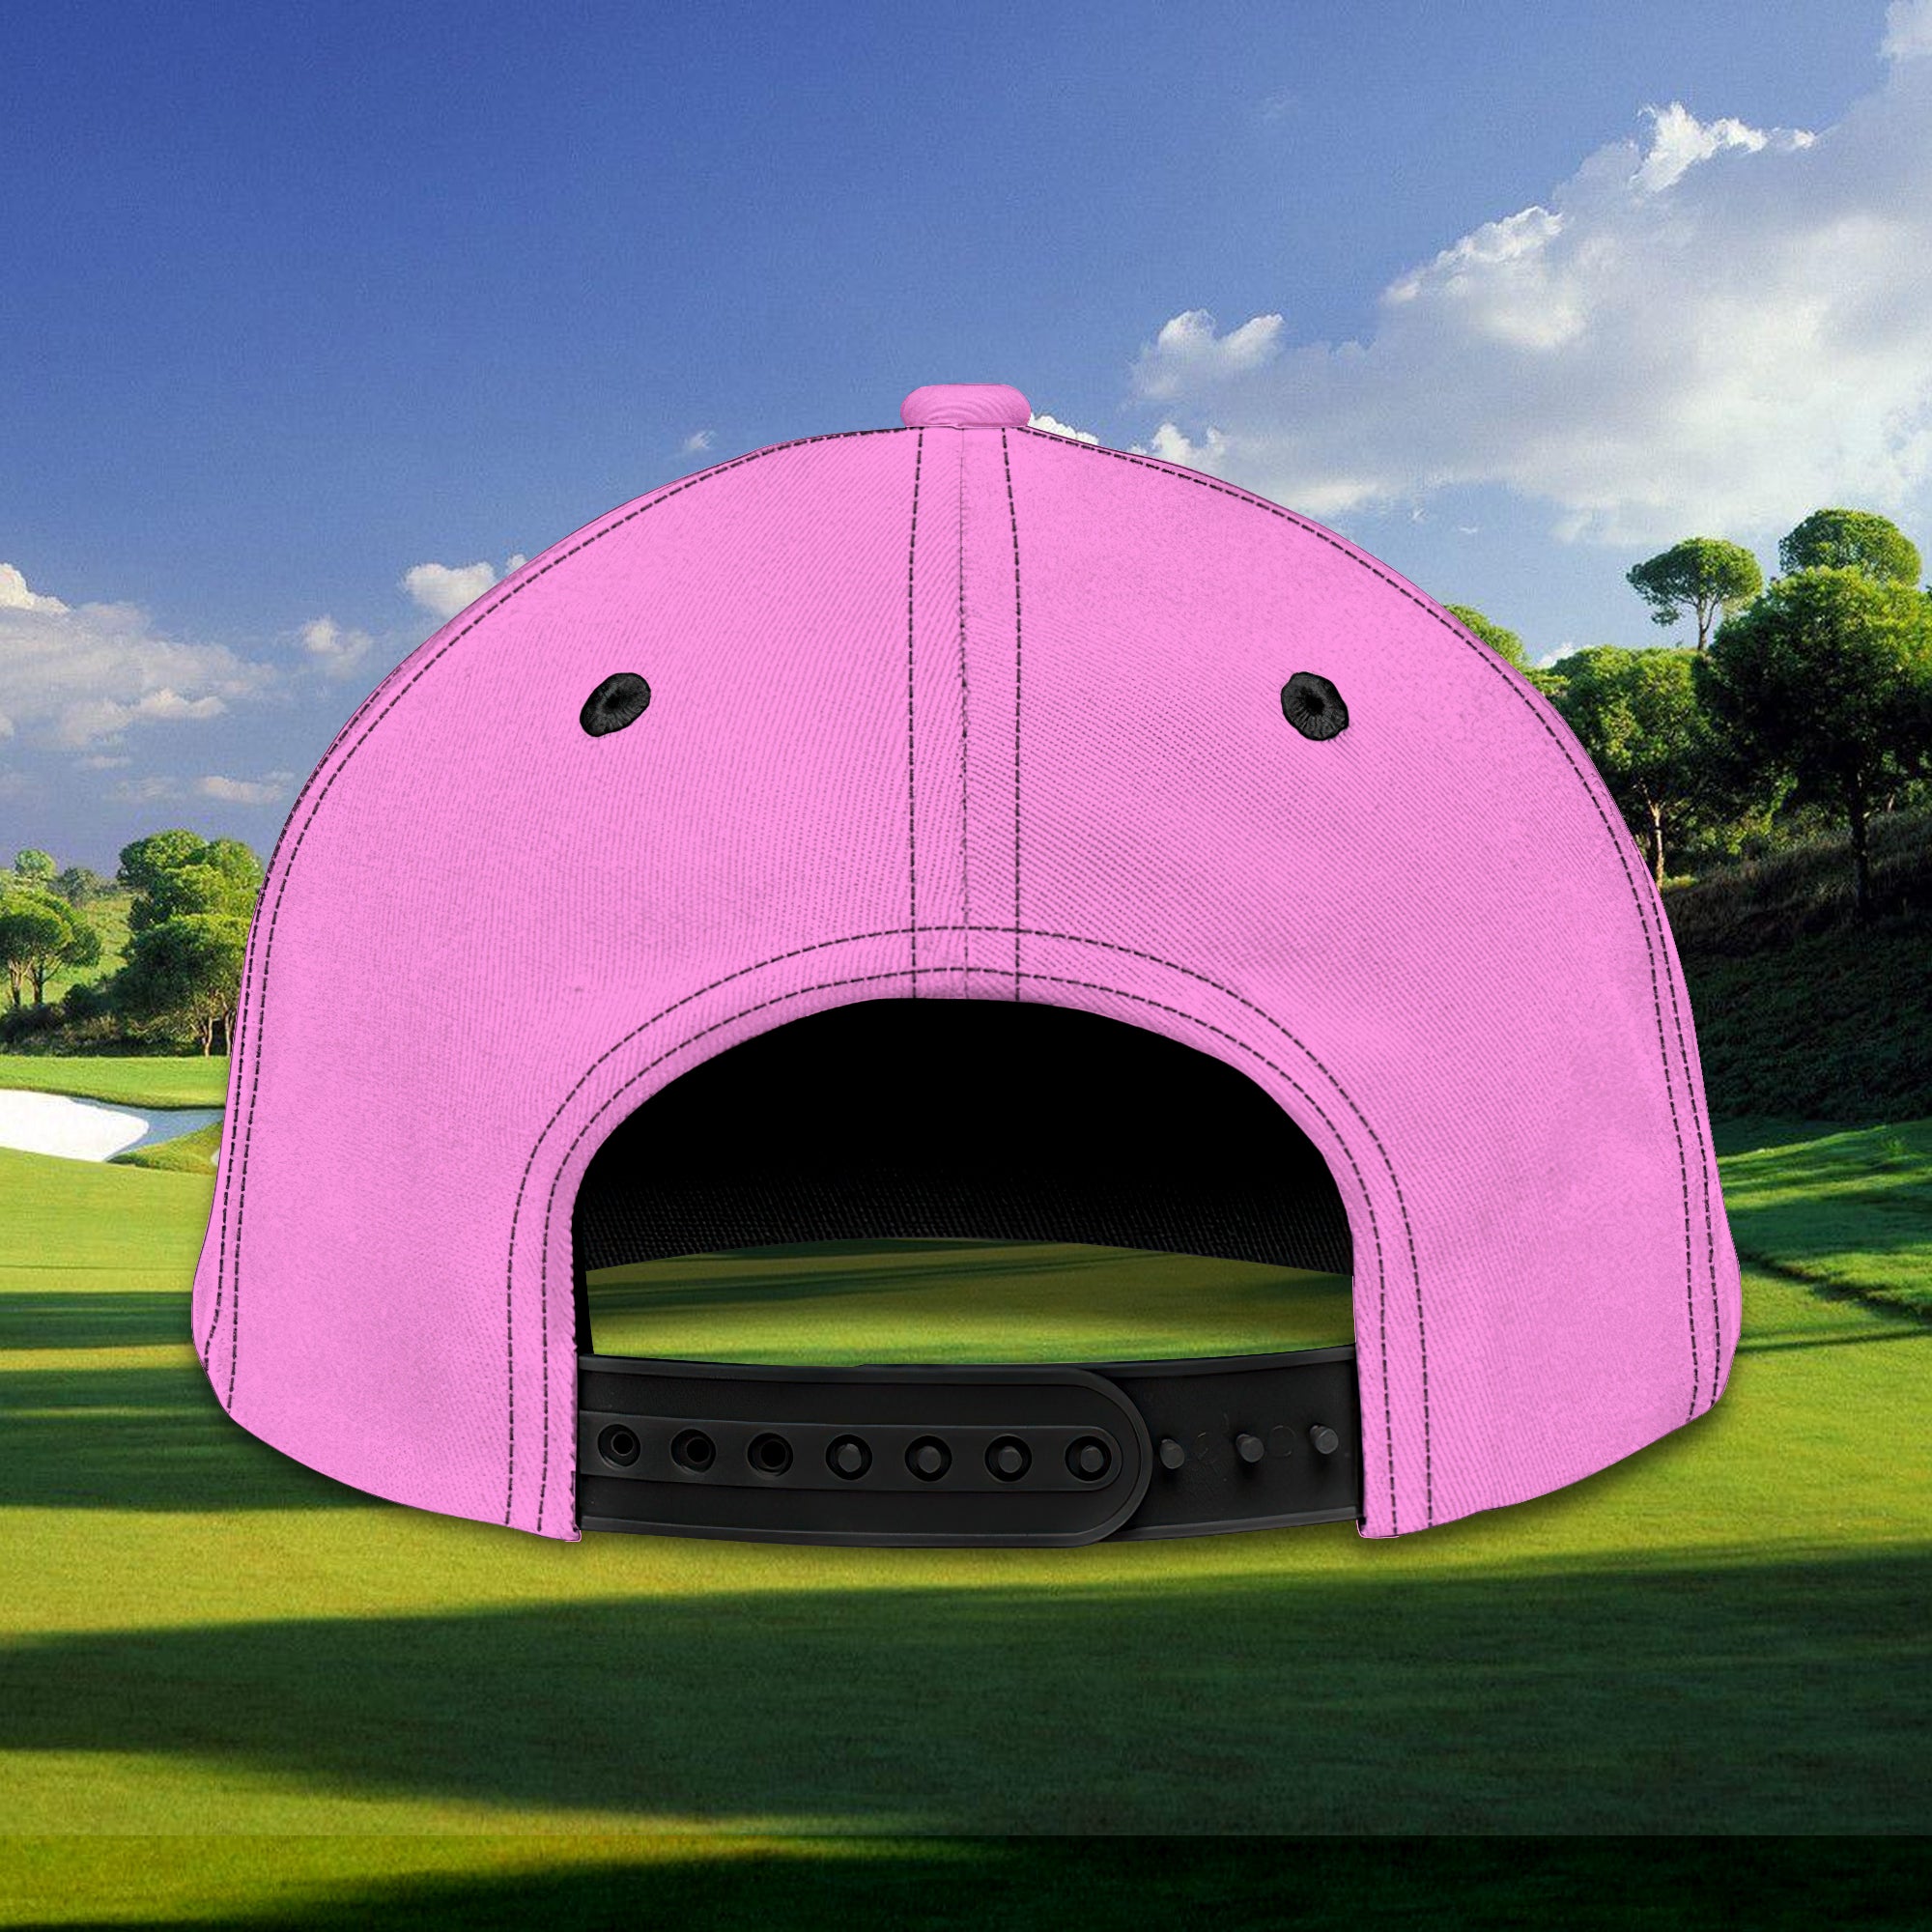 Plan For Golf The Day - Golf - Personalized Name Cap - Mitru